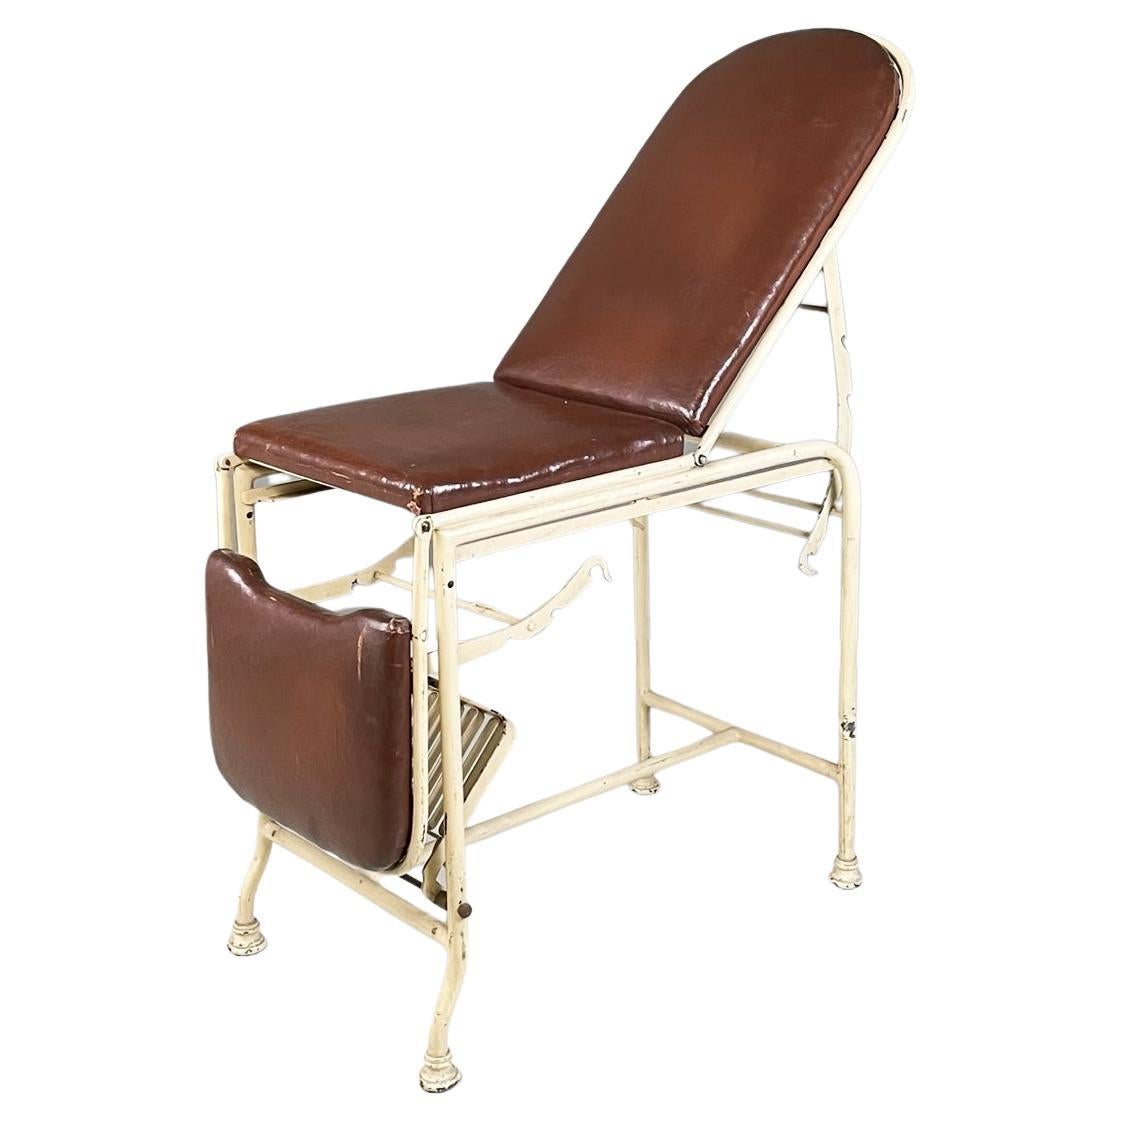 Italian Mid-Century Medical Laboratory Bed Brown Leather and White Metal, 1940s For Sale